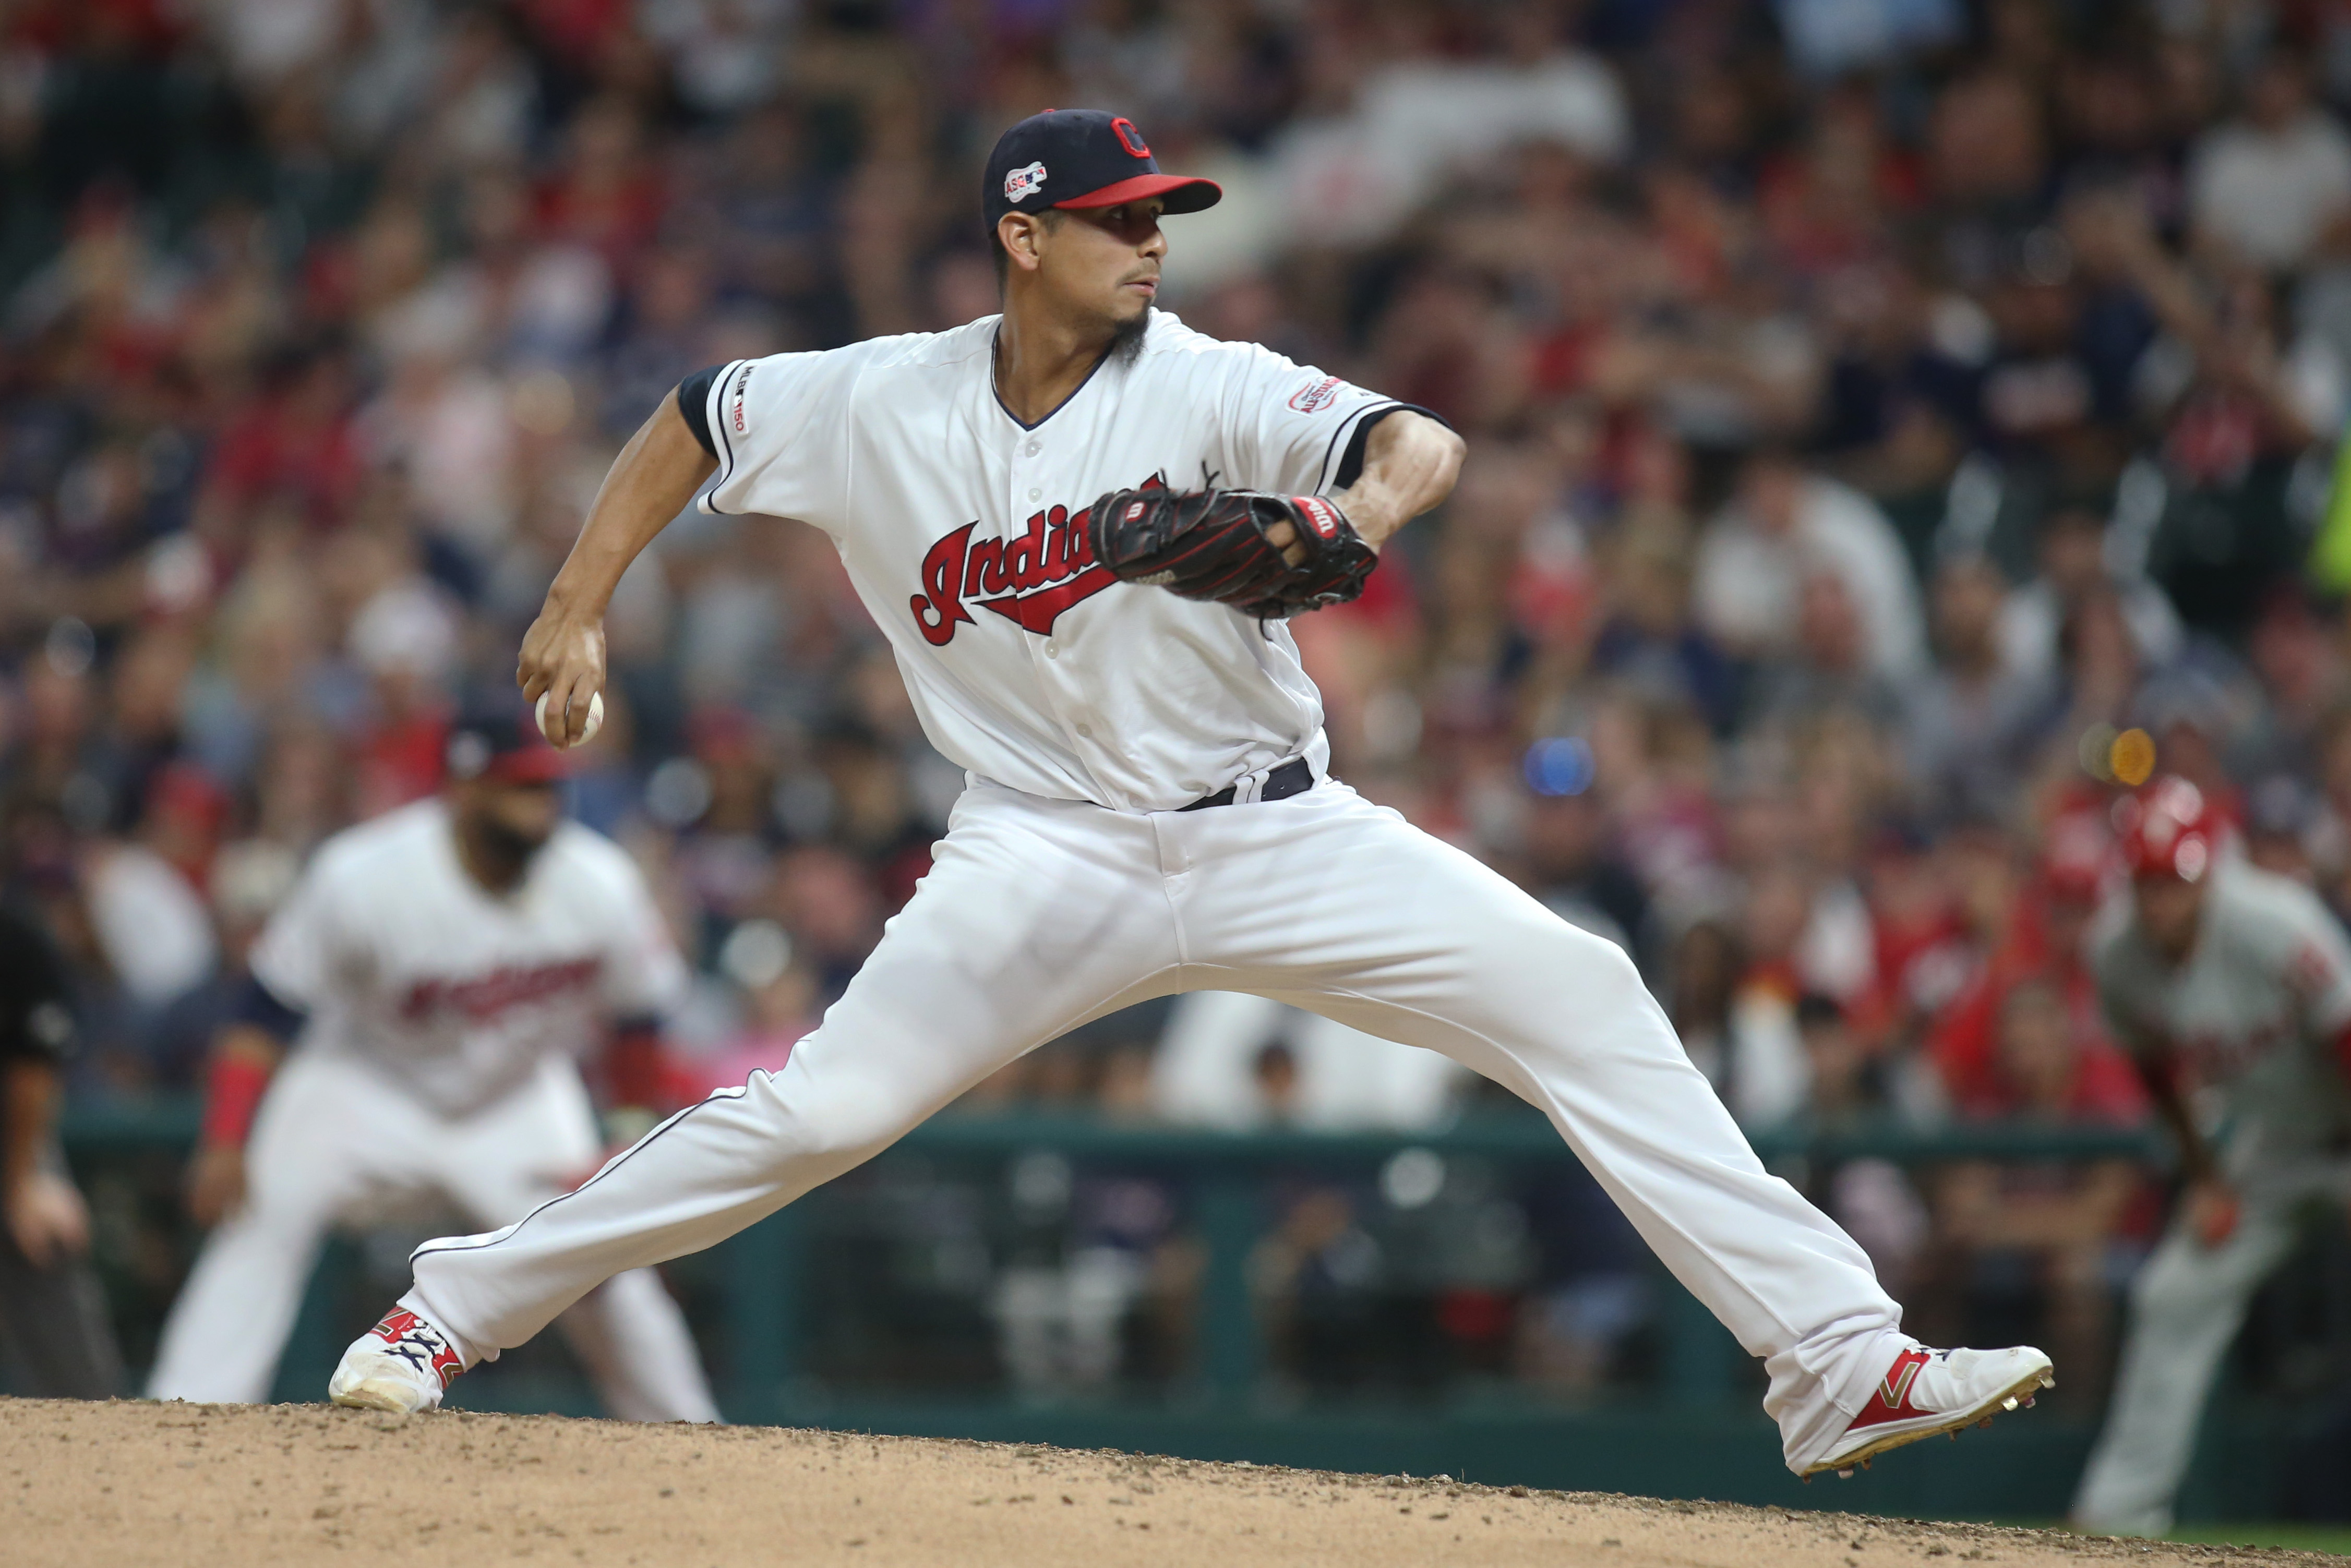 Indians pitcher Carlos Carrasco named the 2019 MLB Player of